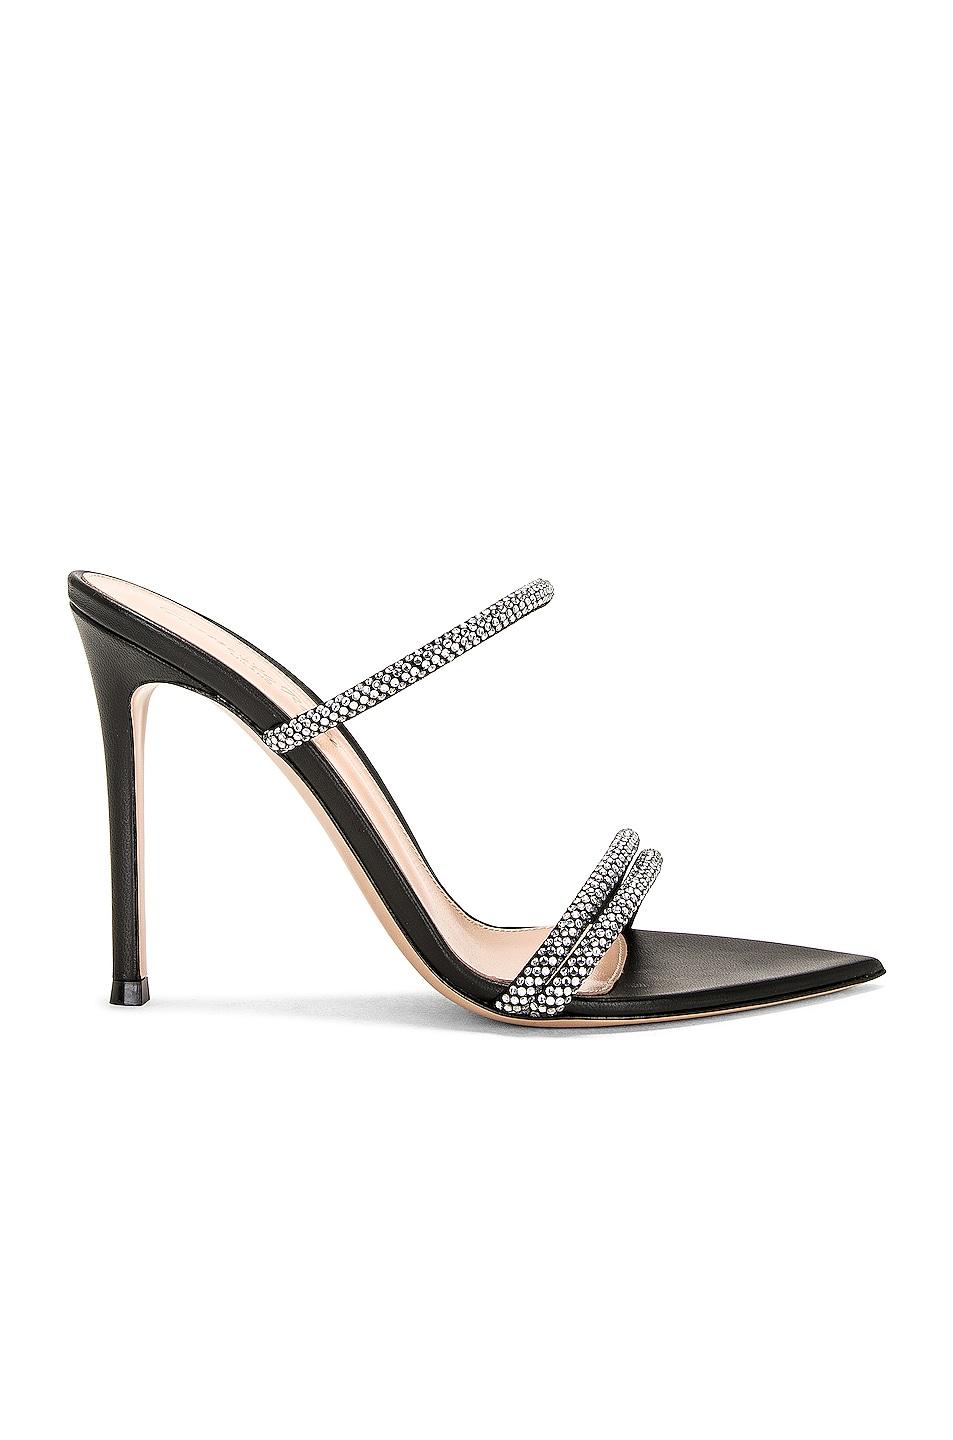 Gianvito Rossi Cannes Sandal in White | Lyst